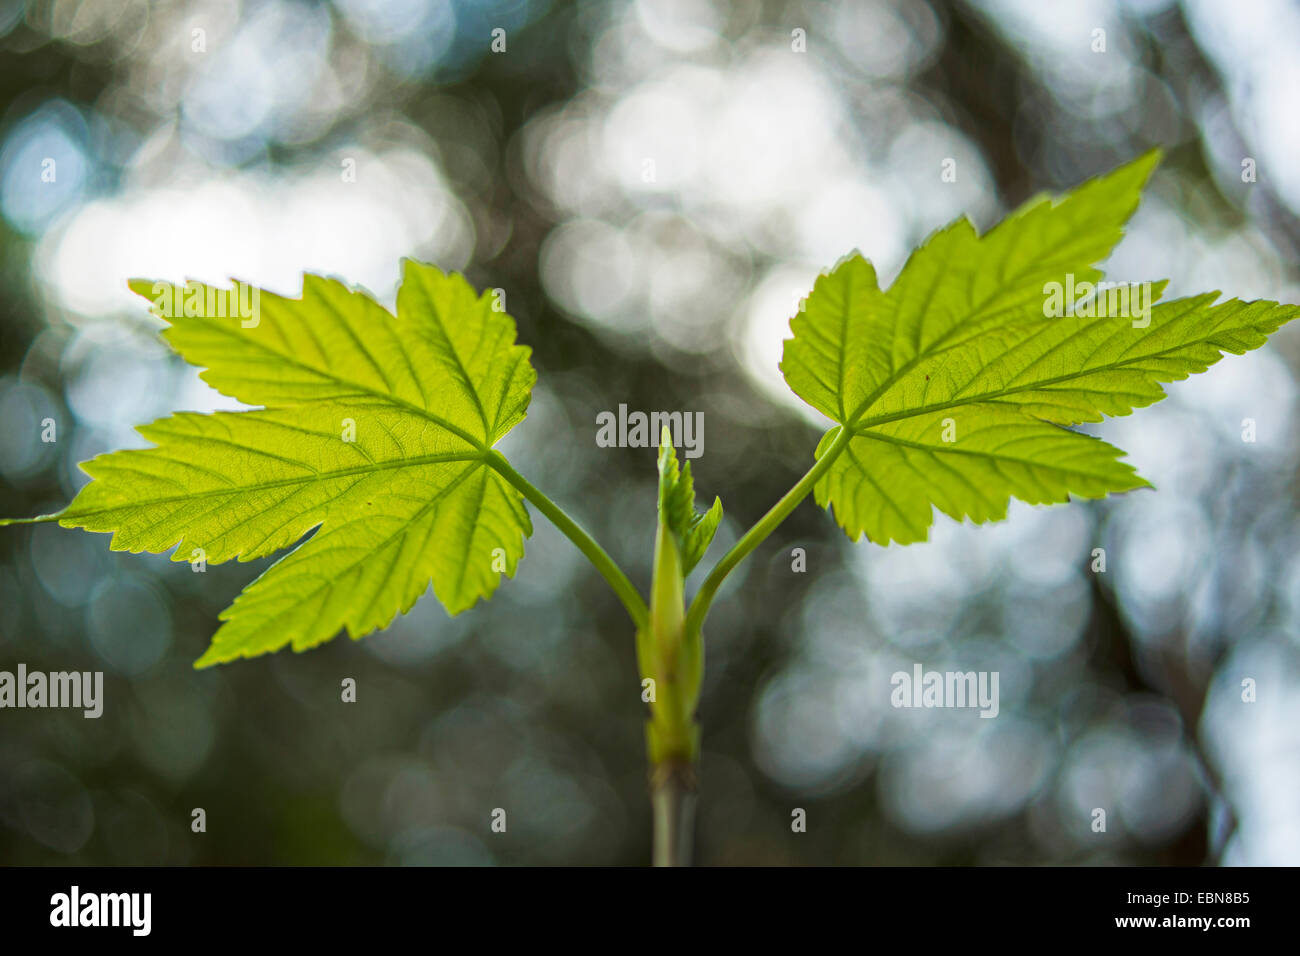 sycamore maple, great maple (Acer pseudoplatanus), leaf shoot, Germany Stock Photo